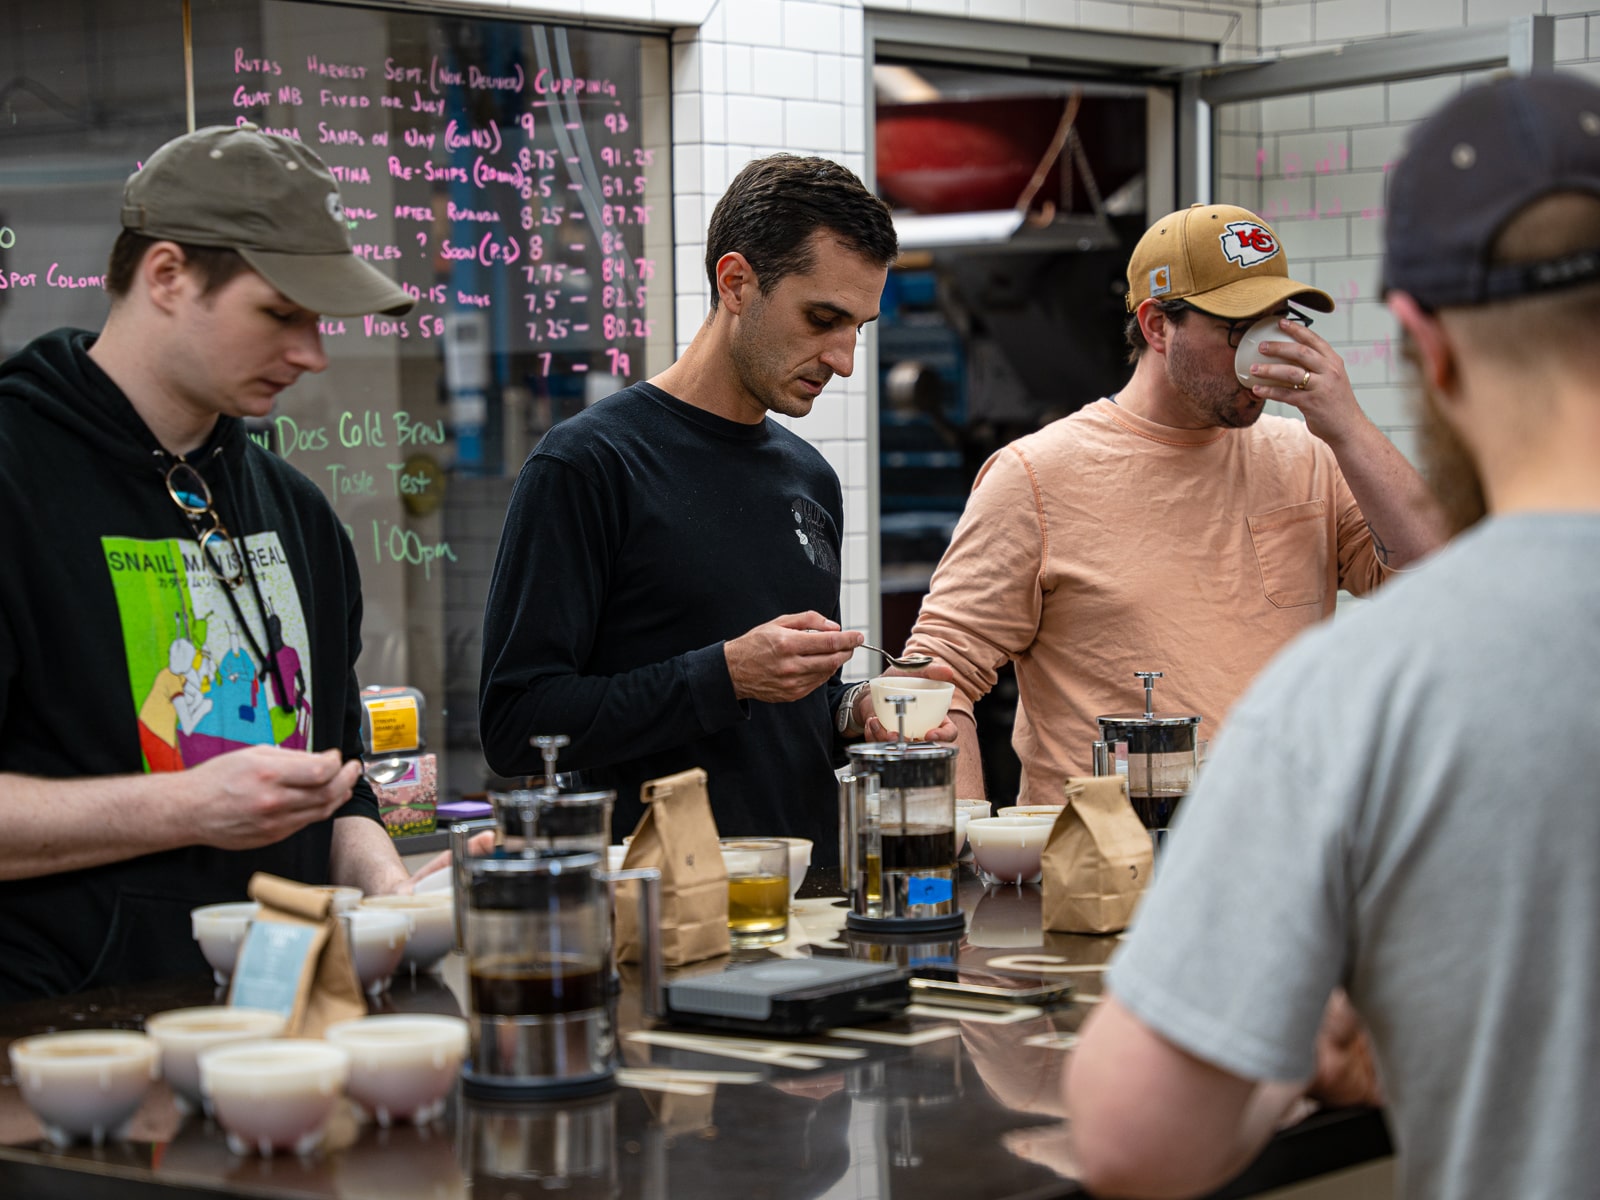 Team tasting cold brew coffee next to hot coffee